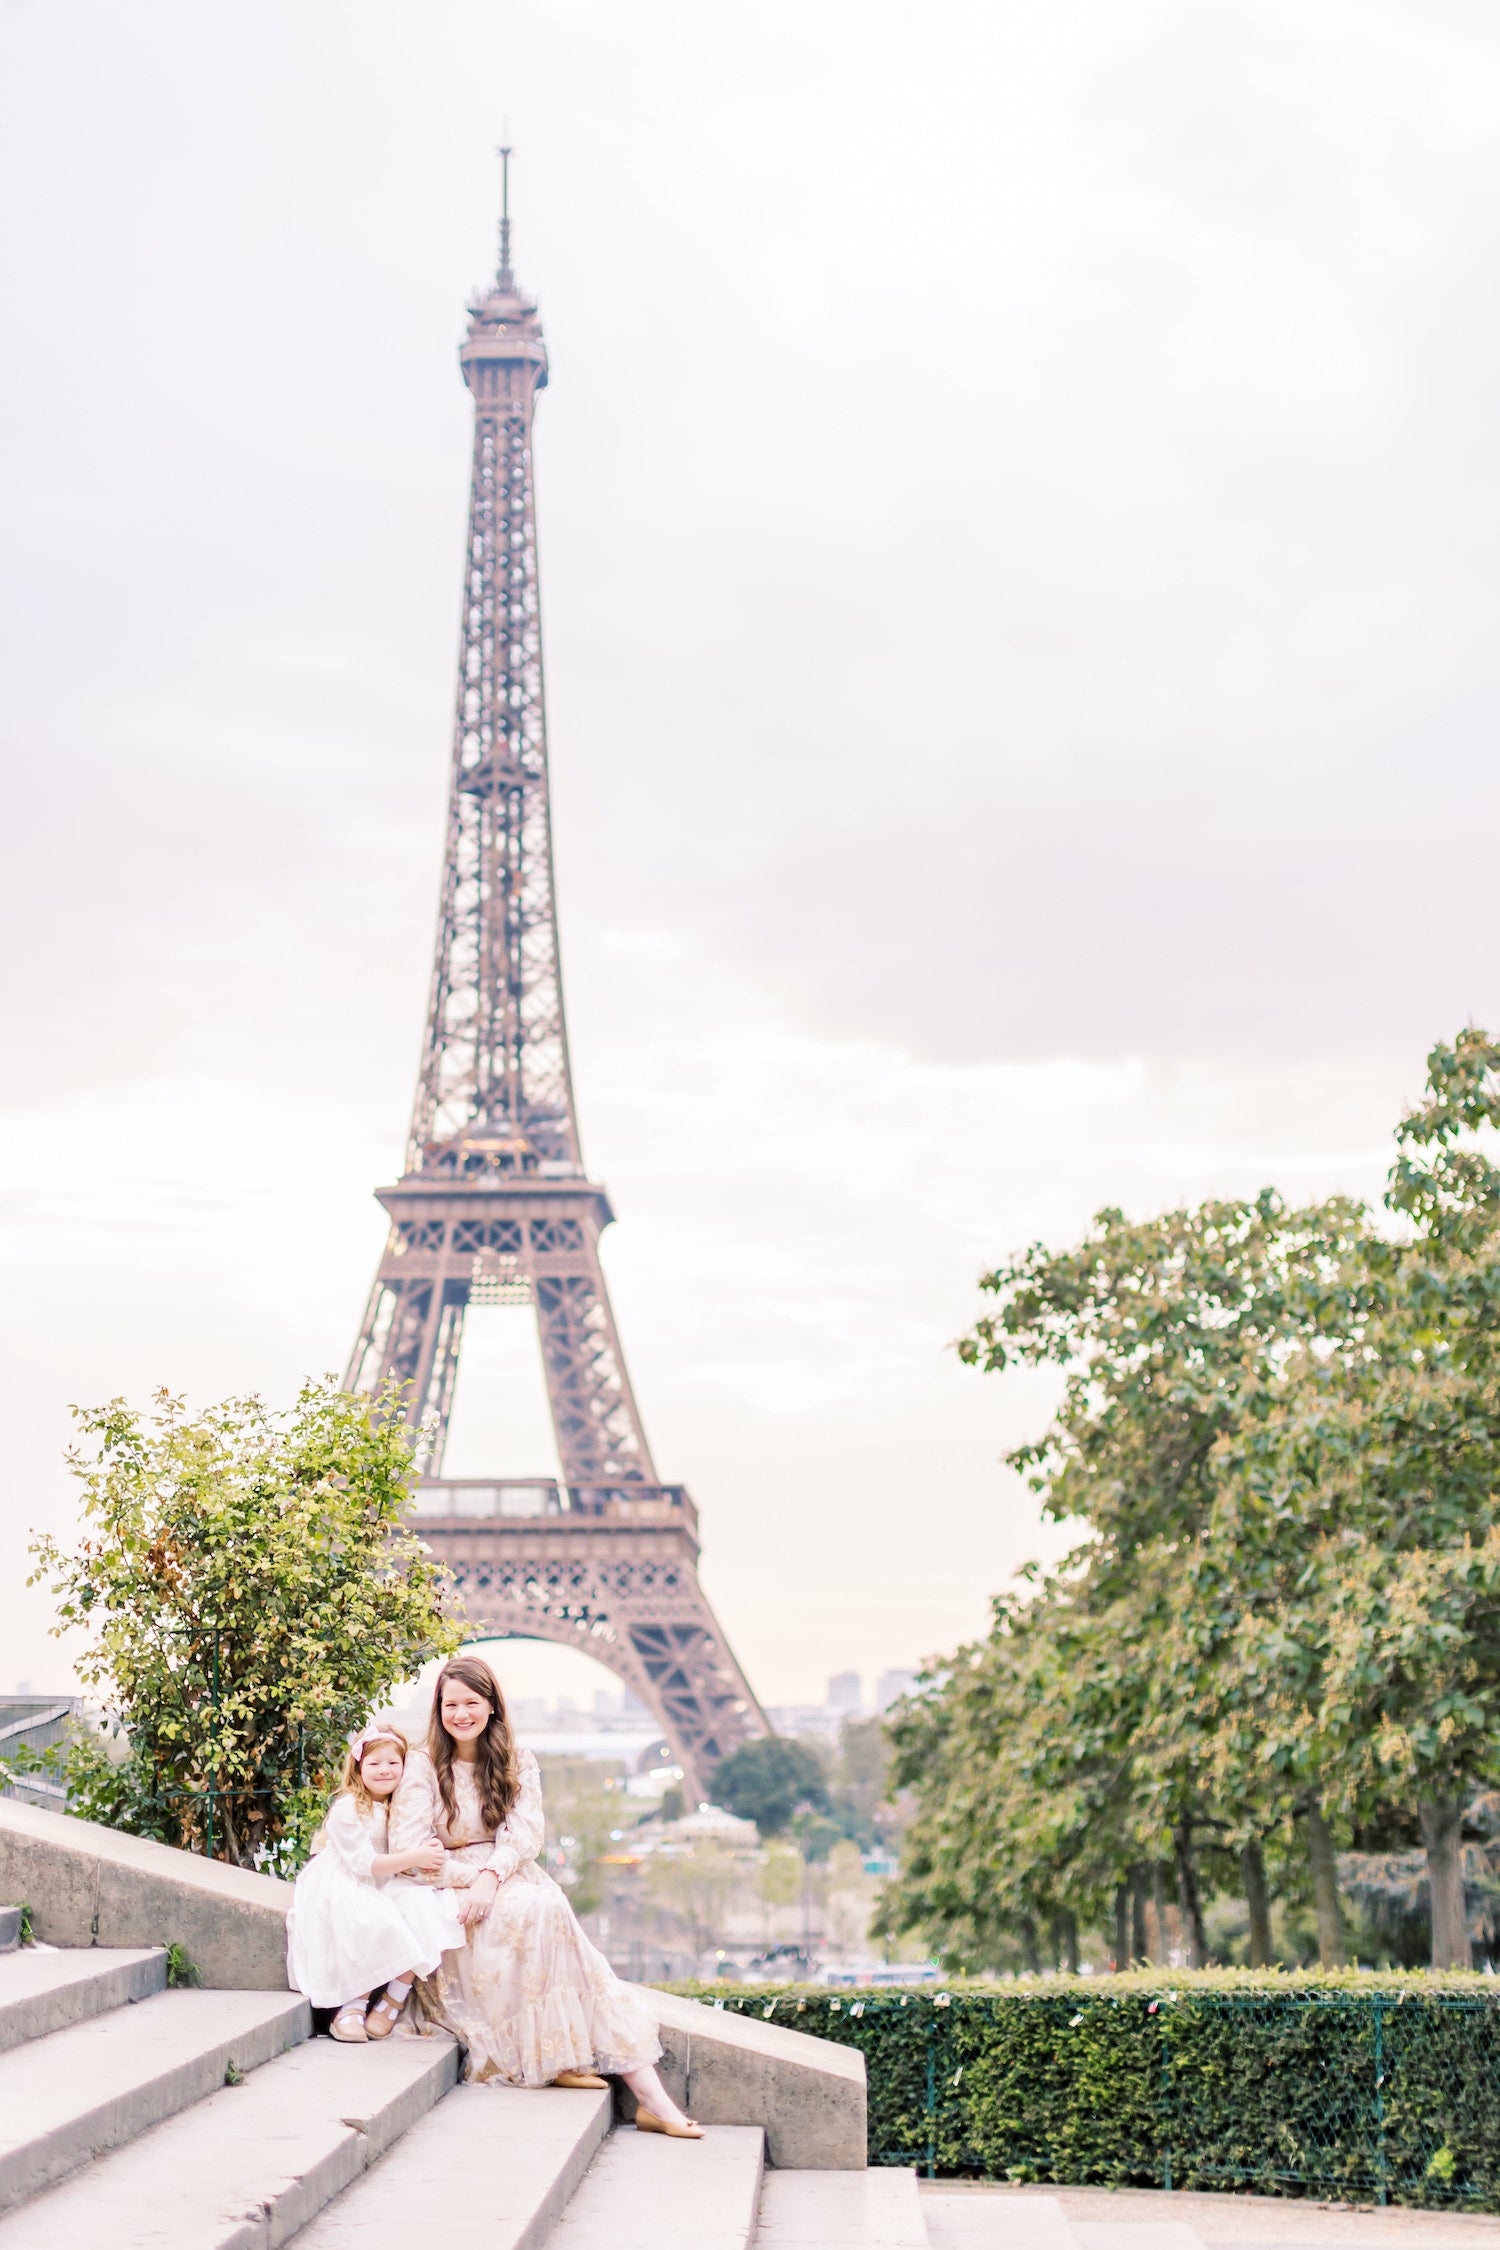 Travelling tips - Family journey to France - Paris with children what to visit and where to shop Eiffel tower photoshoot